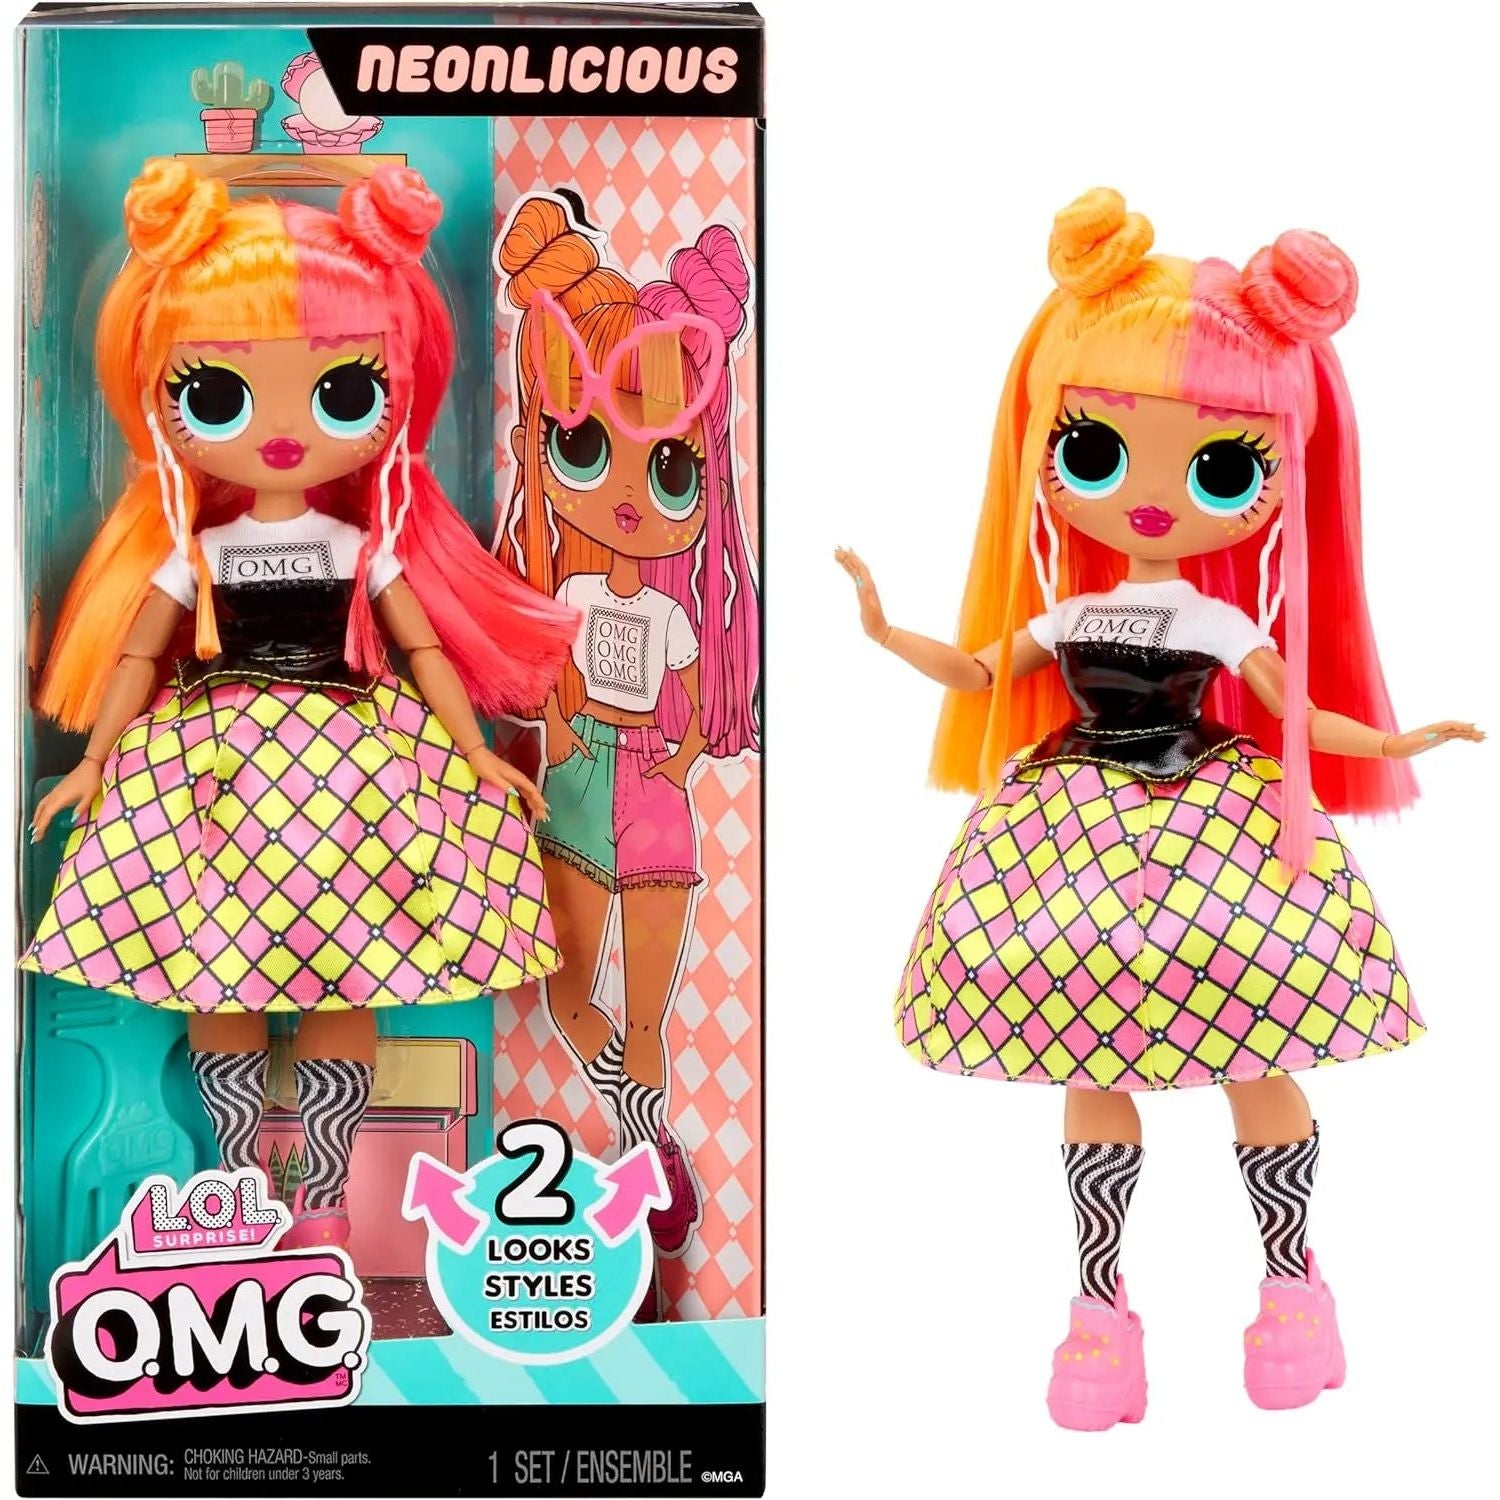 LOL Surprise OMG Neonlicious Fashion Doll LOL Surprise